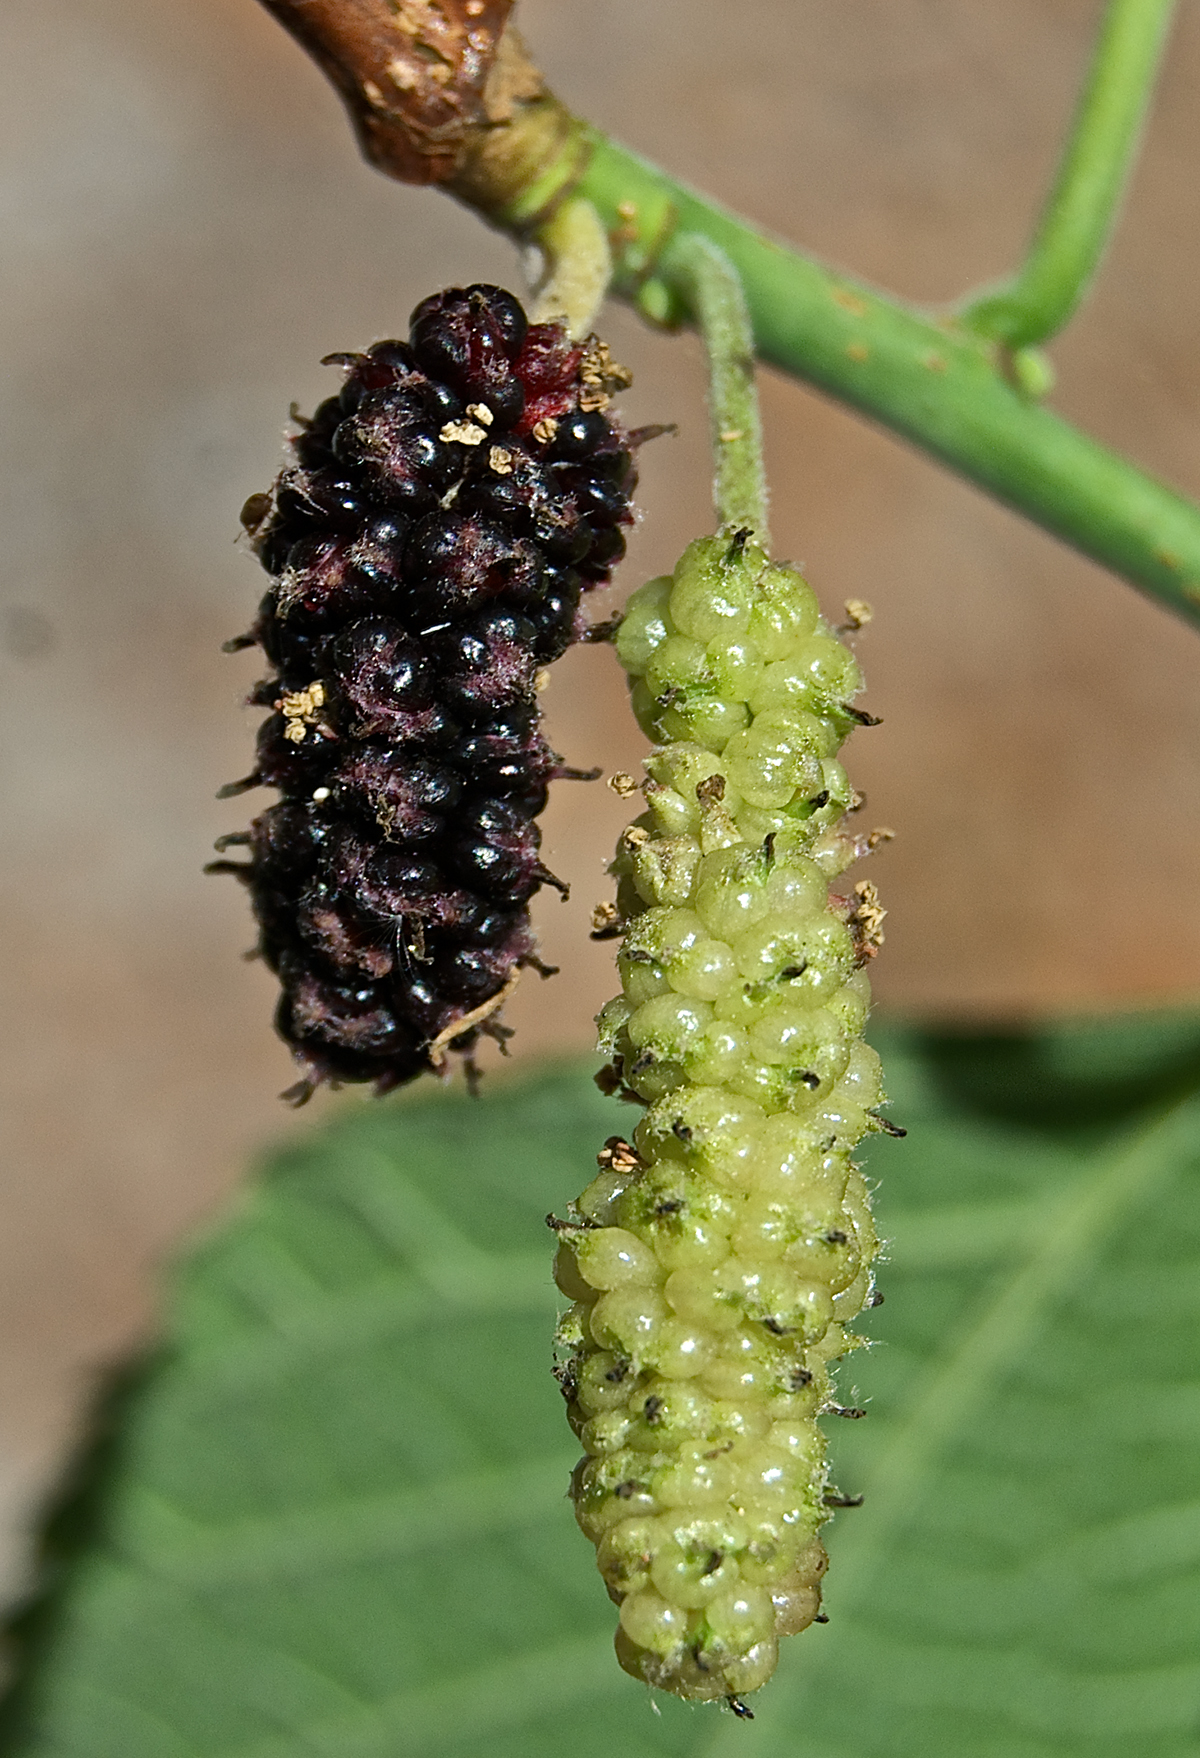 Red mulberry (Morus rubra) fruits.